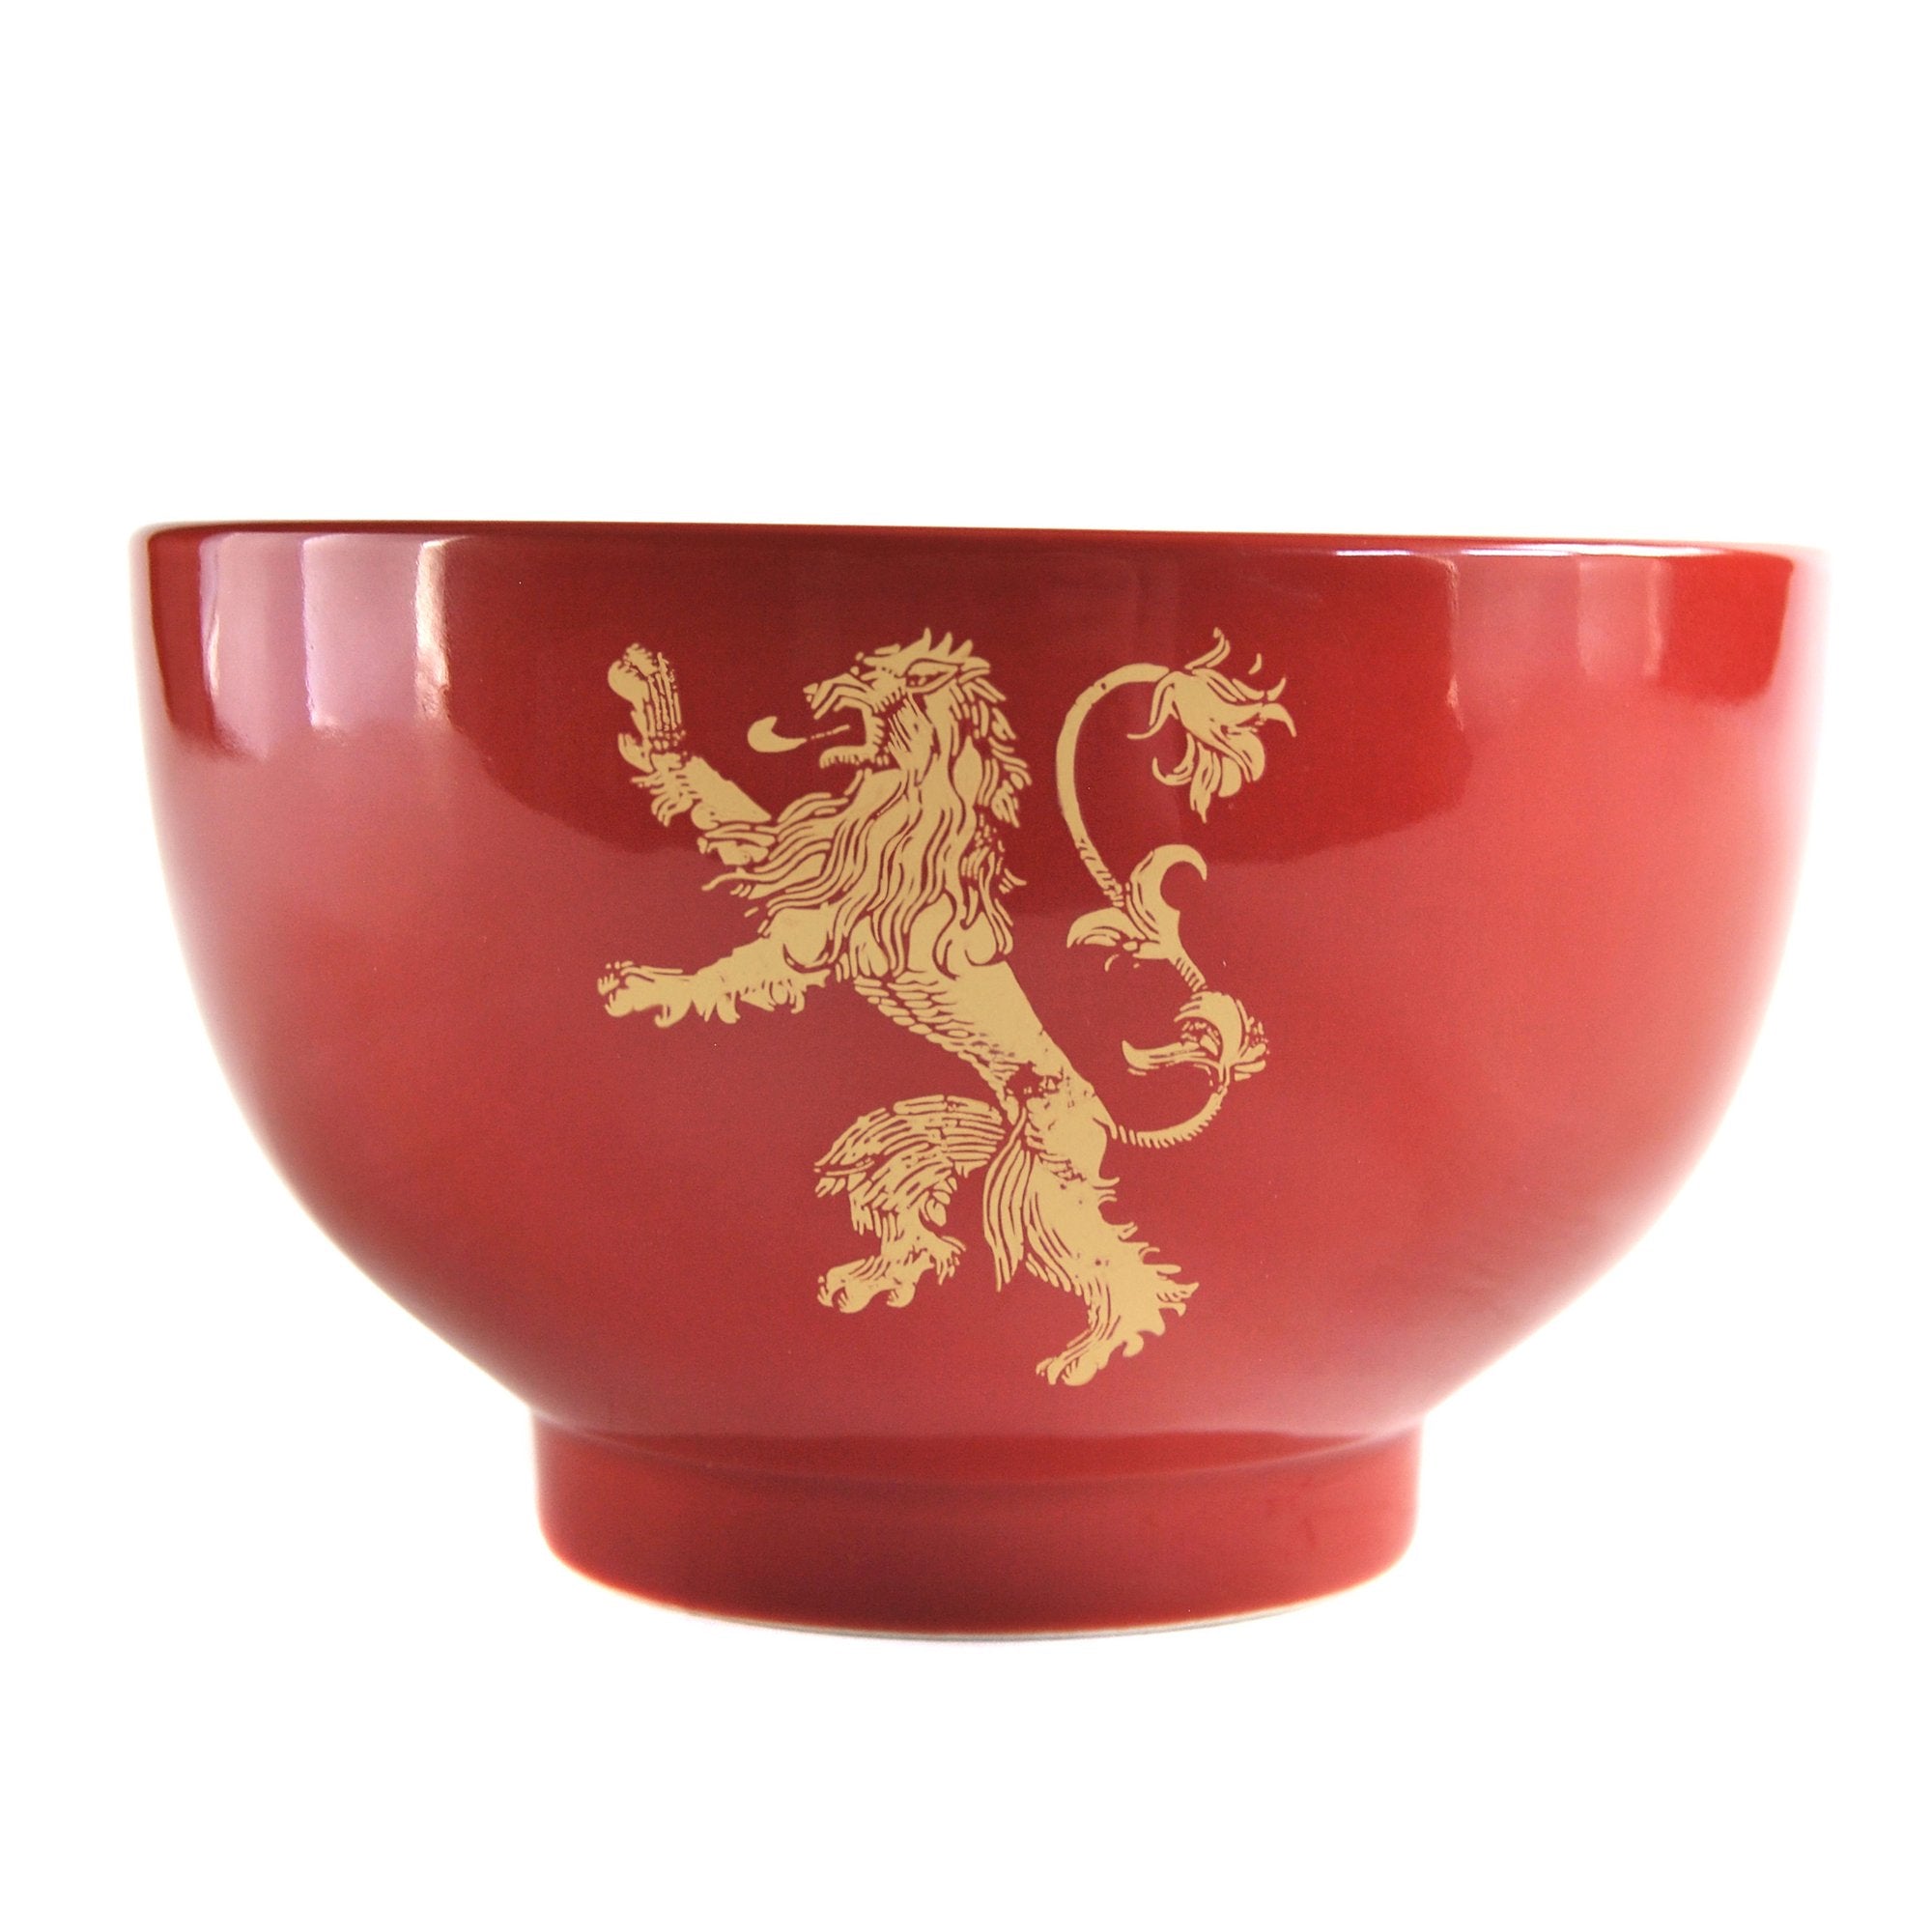 Game of Thrones Bowl - Lannister